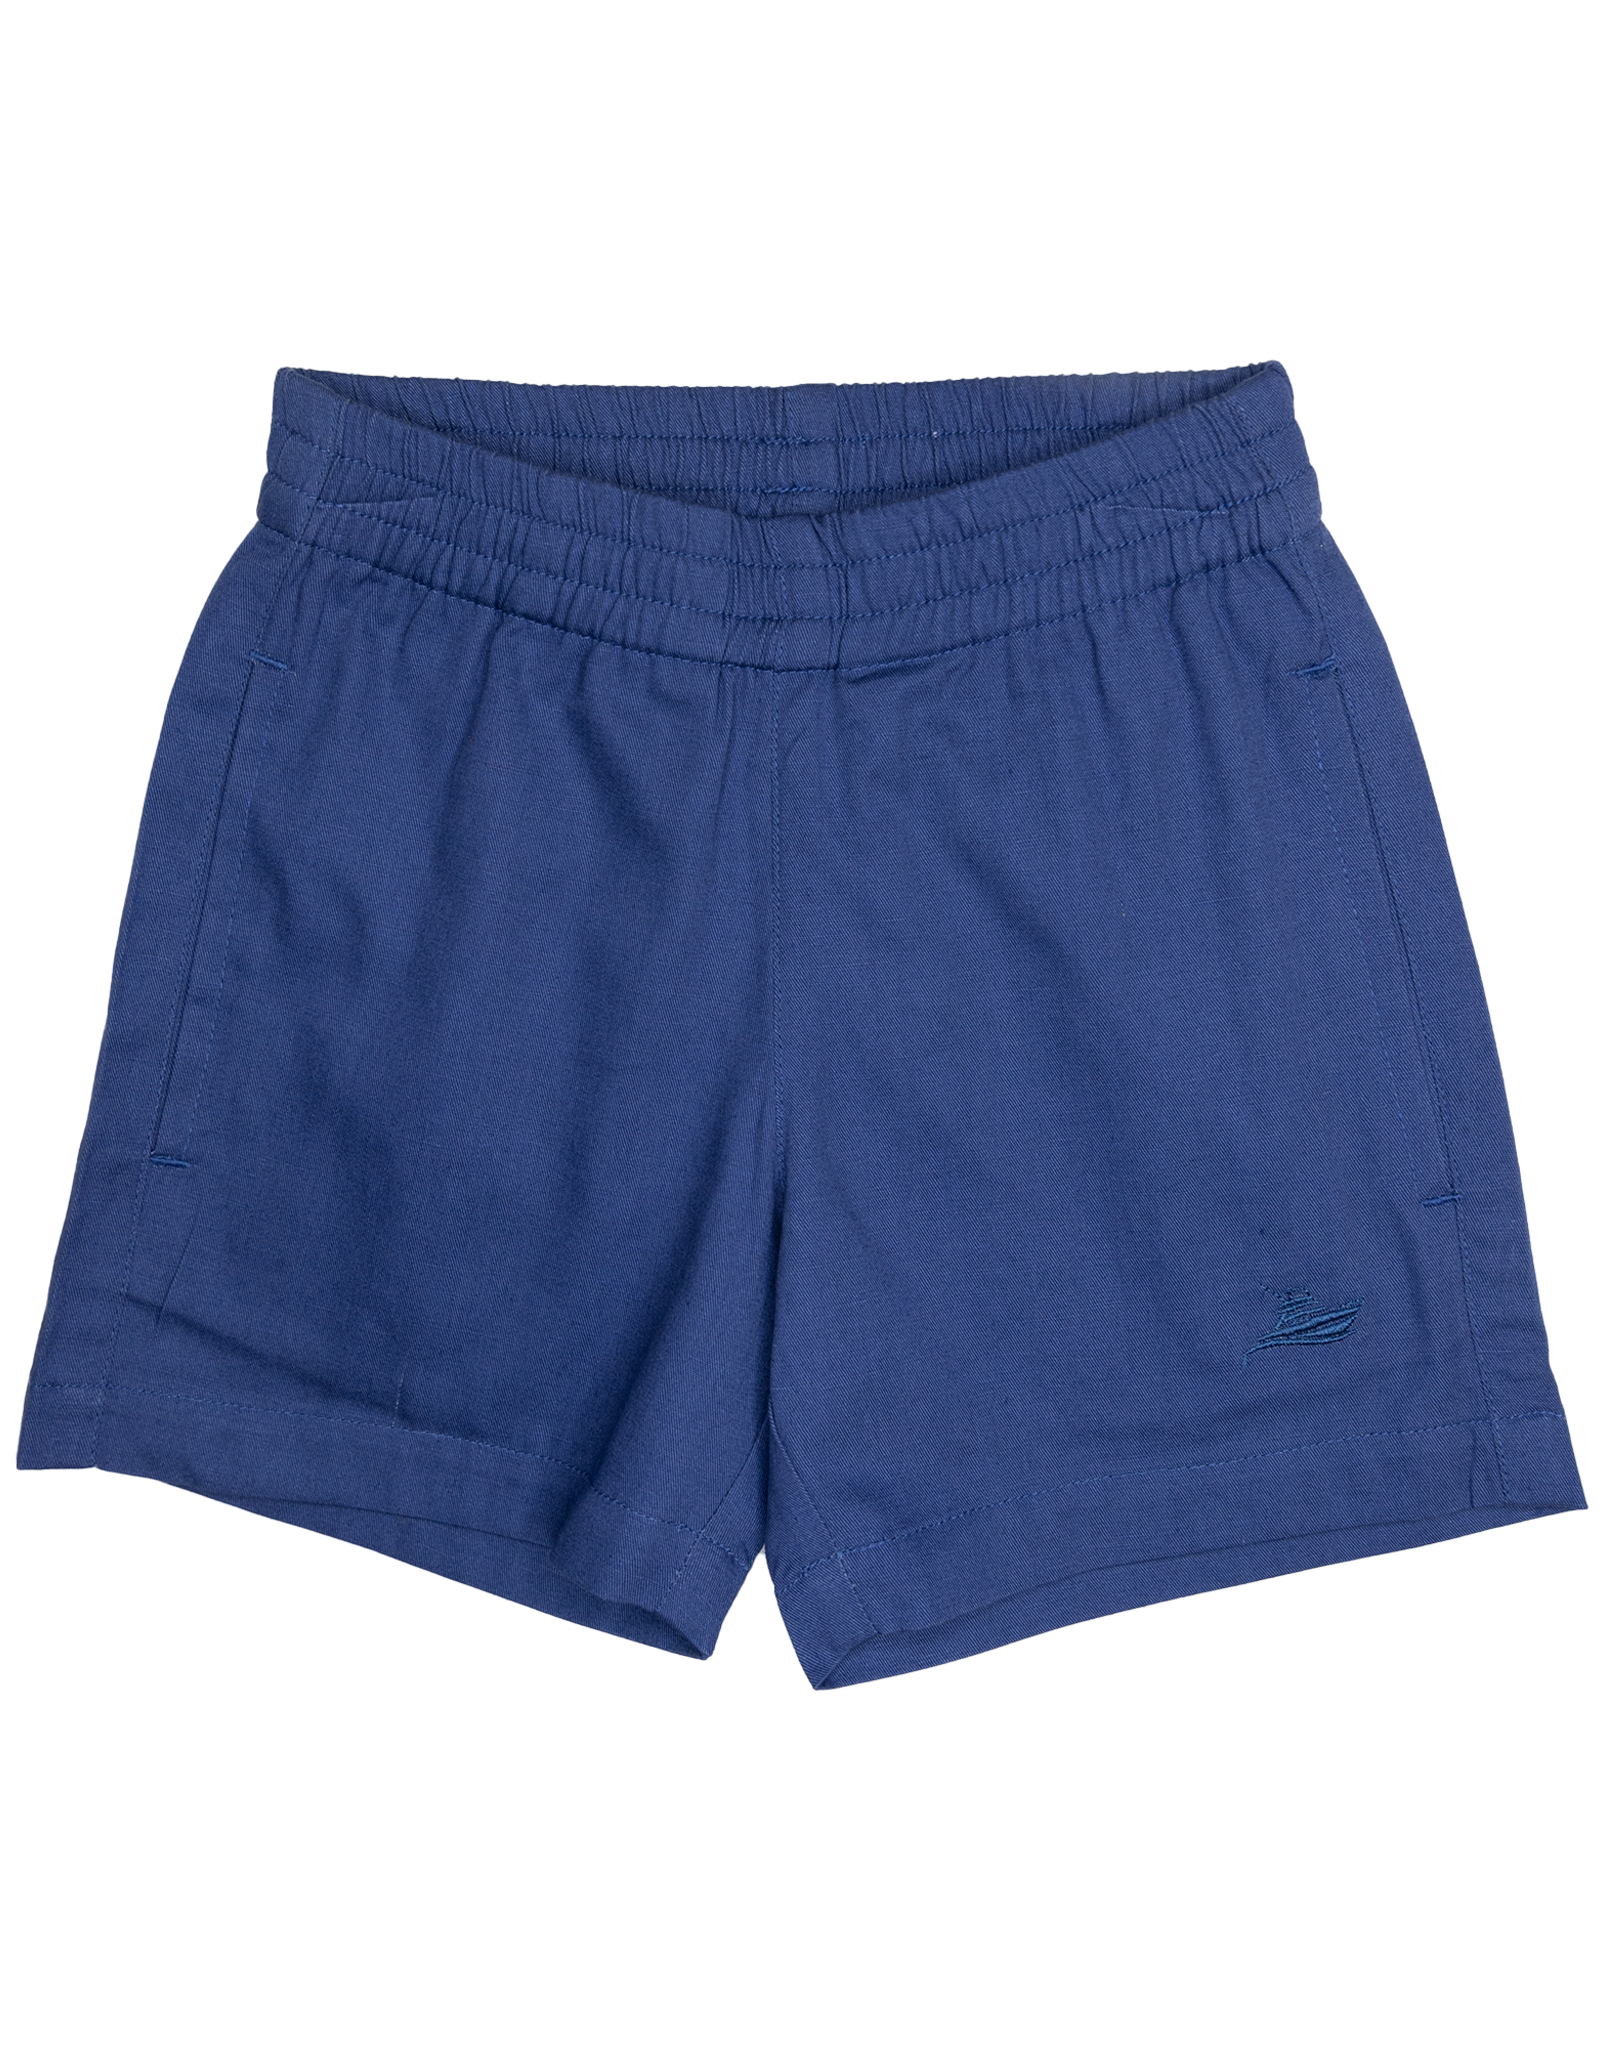 South Bound 3314 Cotton Play Short Navy